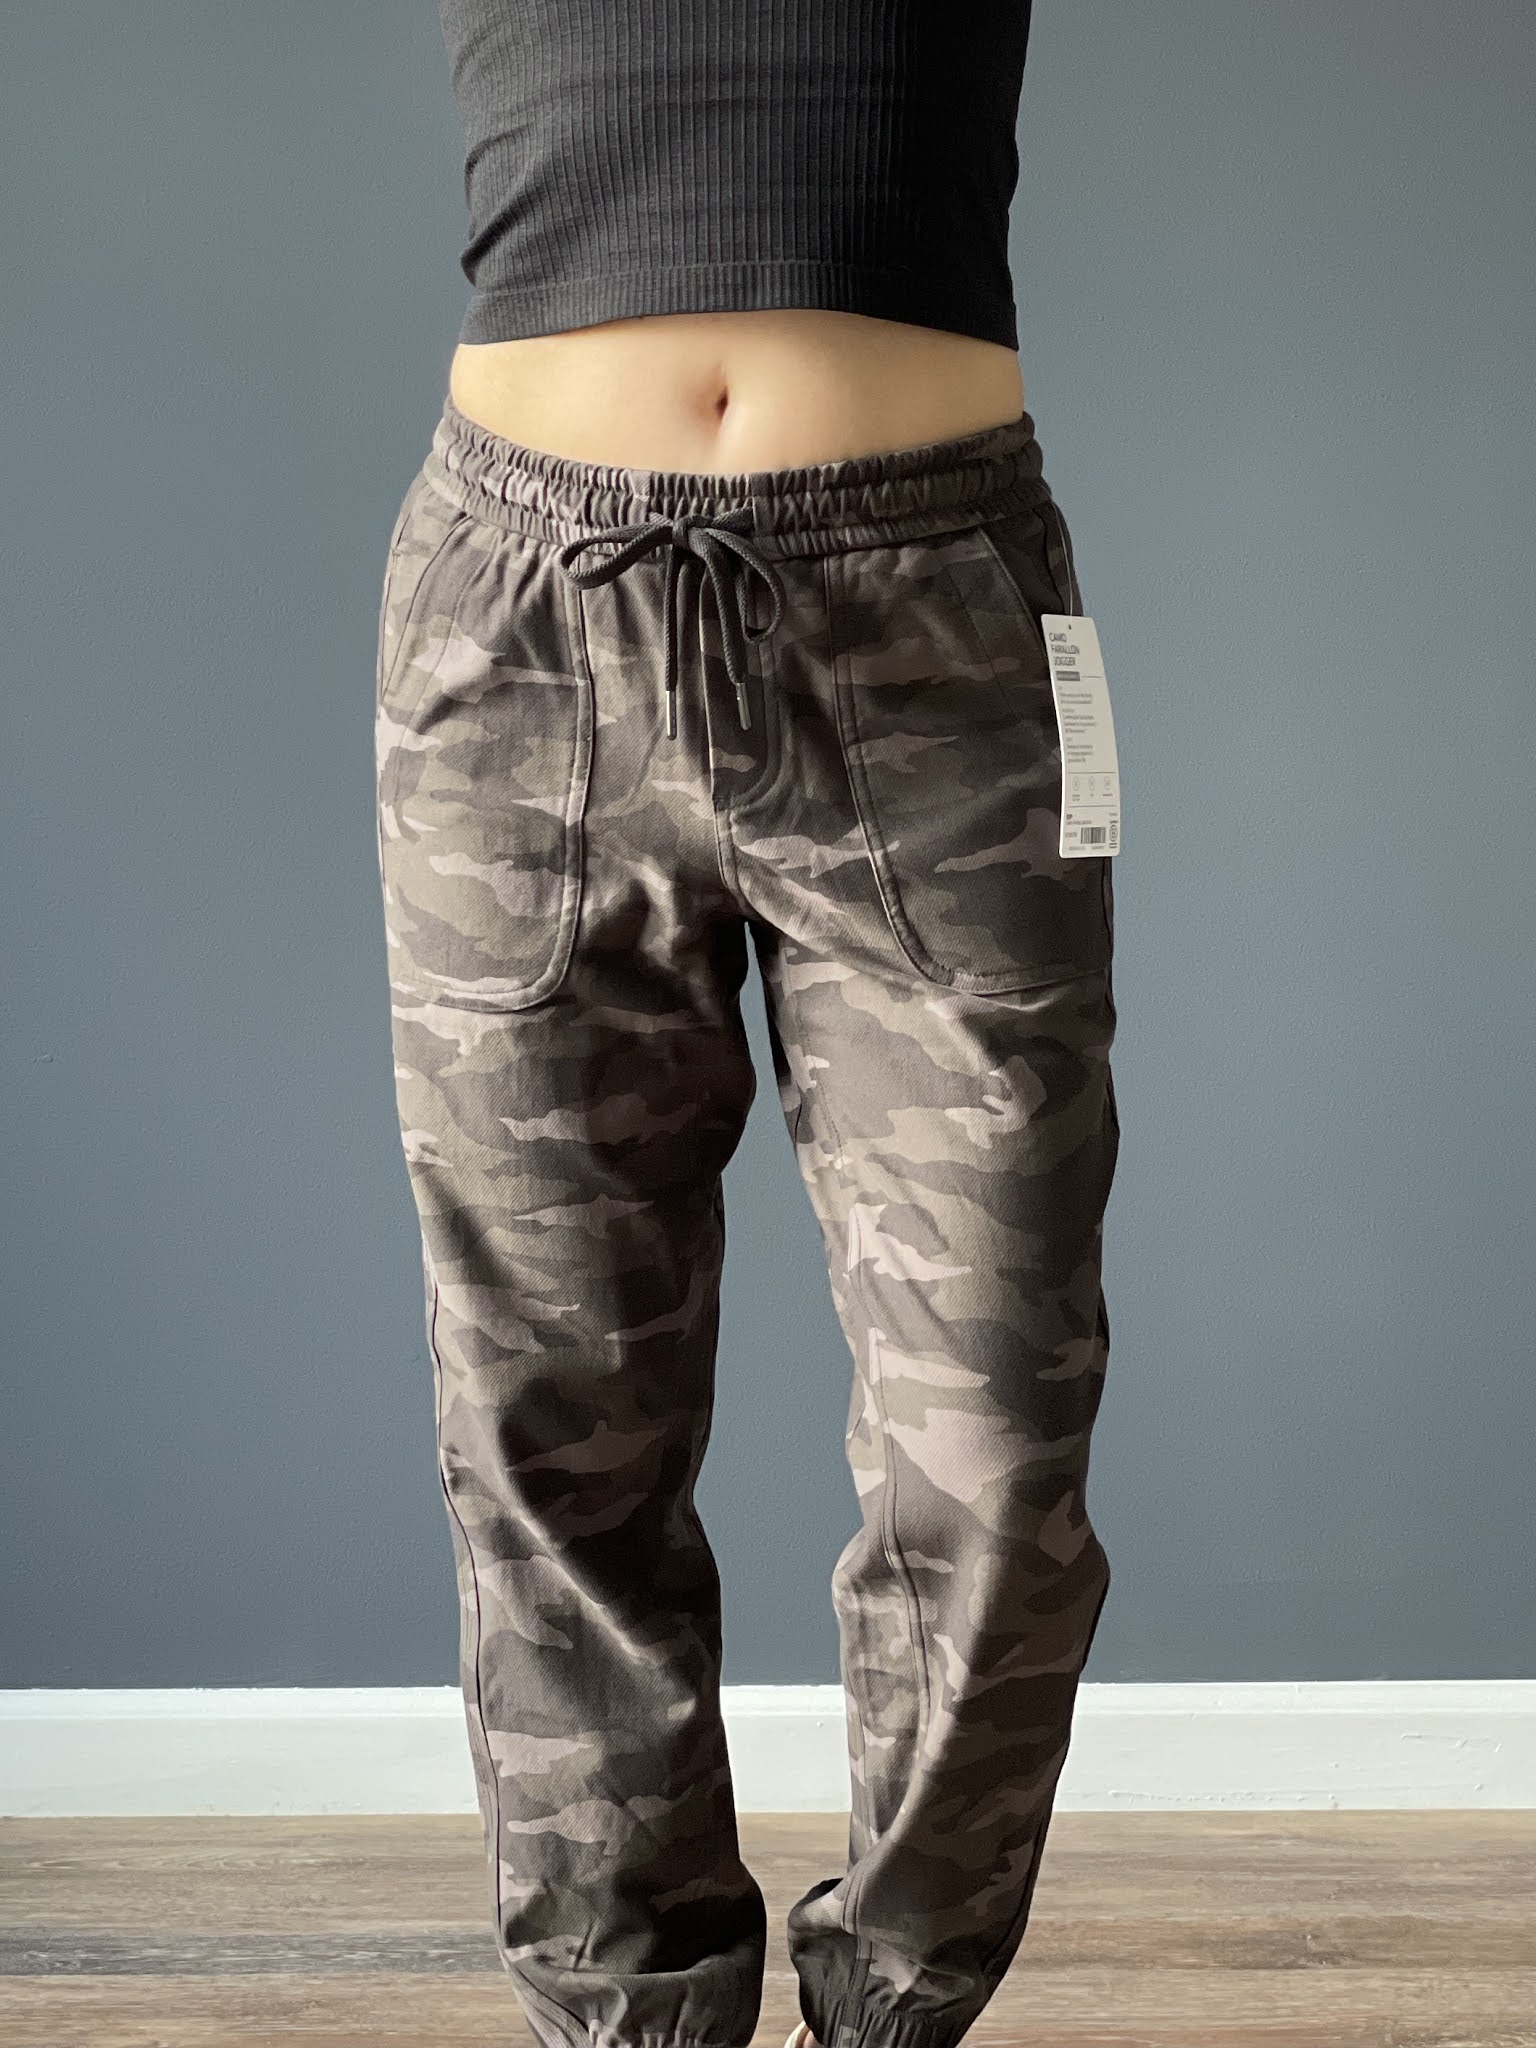 Dupe for the athleta studio jogger? They're a very thin, stretchy